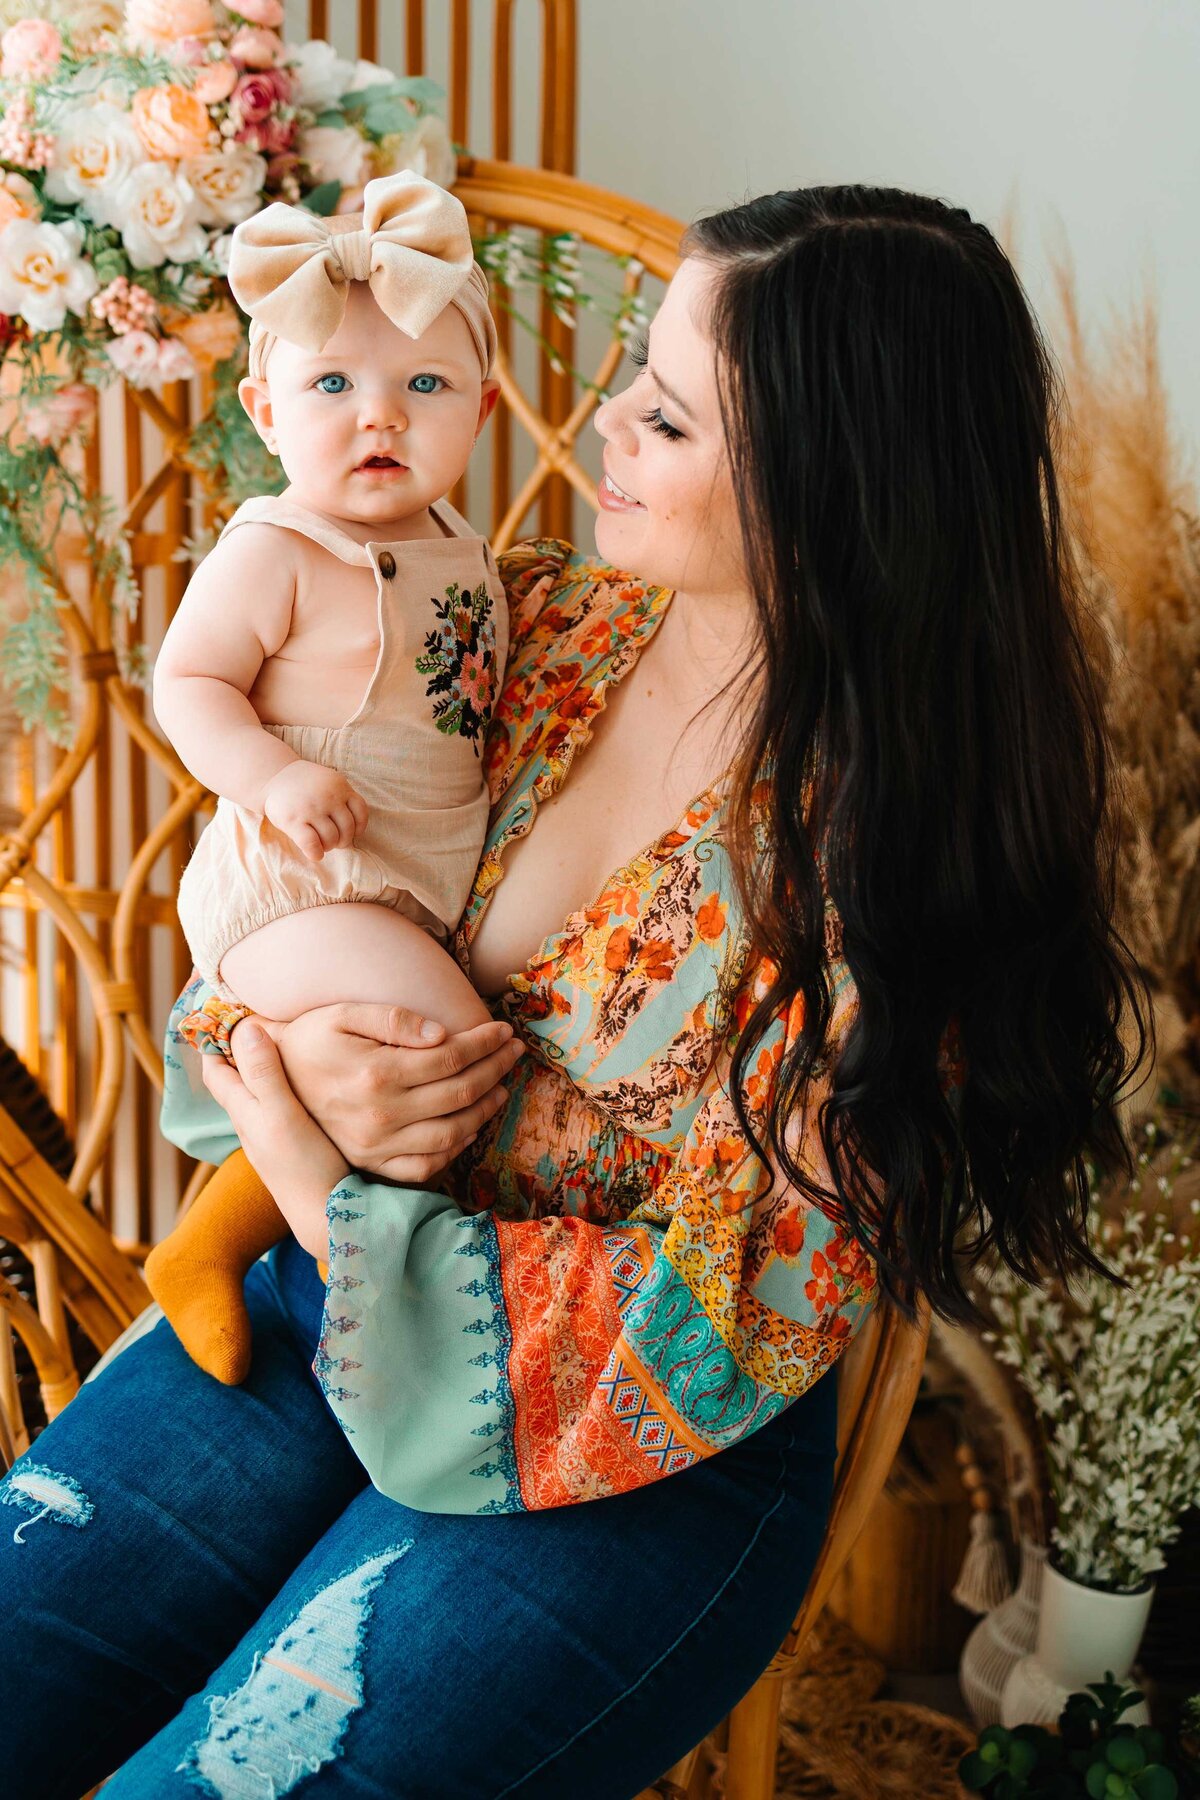 A joyful mom carries her little baby, both dressed in vibrant outfits. The scene, captured by a top Albuquerque photographer, features a charming backdrop with a chair and decorative faux flowers, showcasing their happy and loving moment.